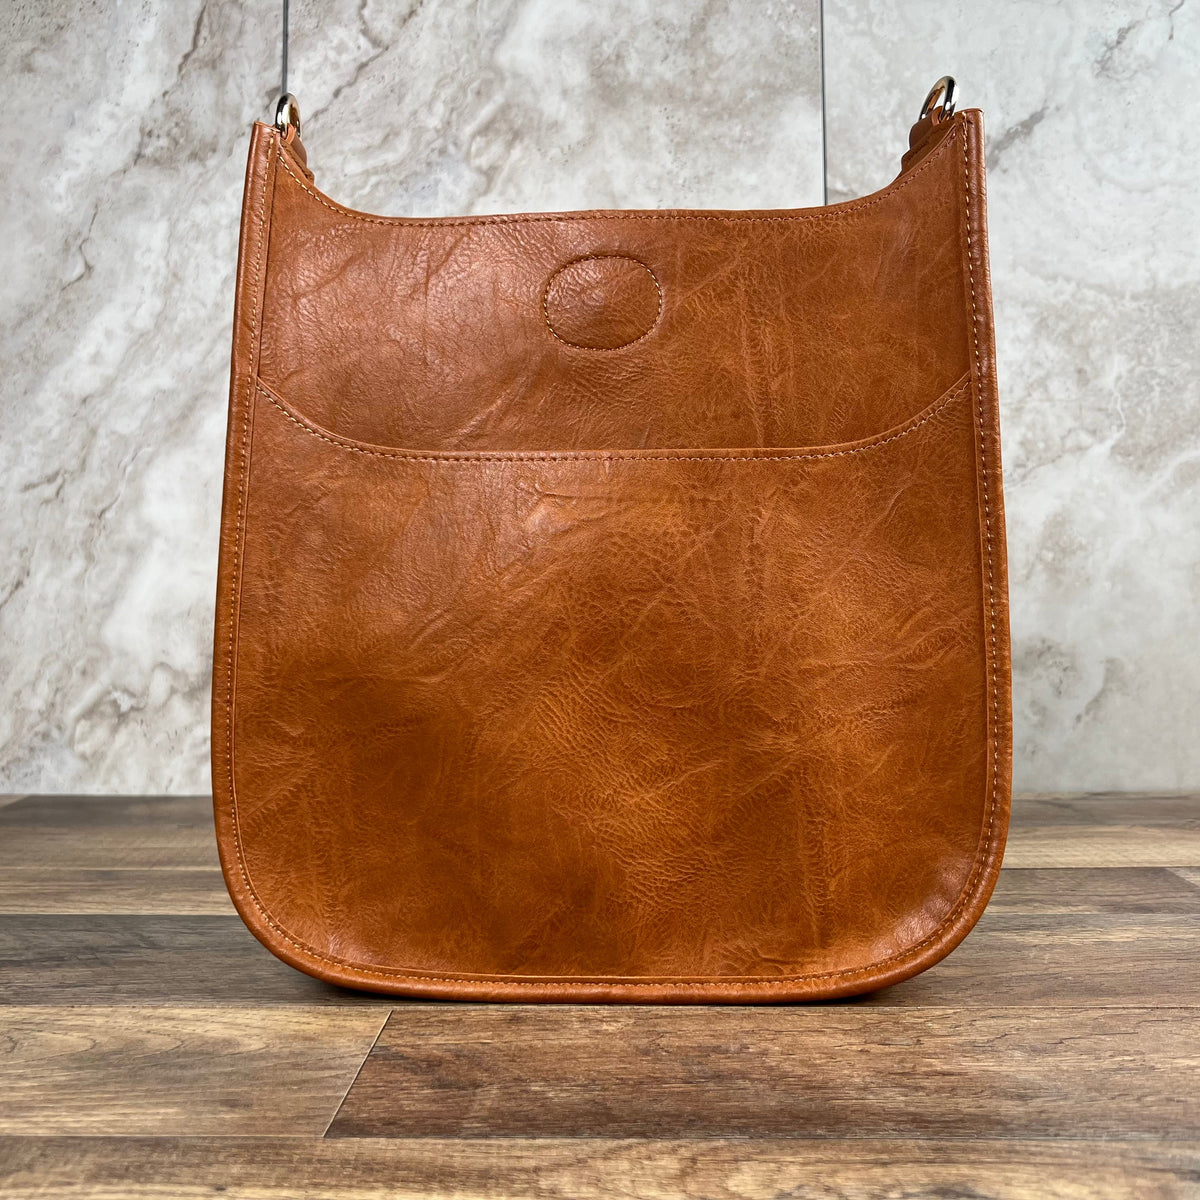 Quality Leather Shoulder Bag with 1 Pocket from Mexico - Camel